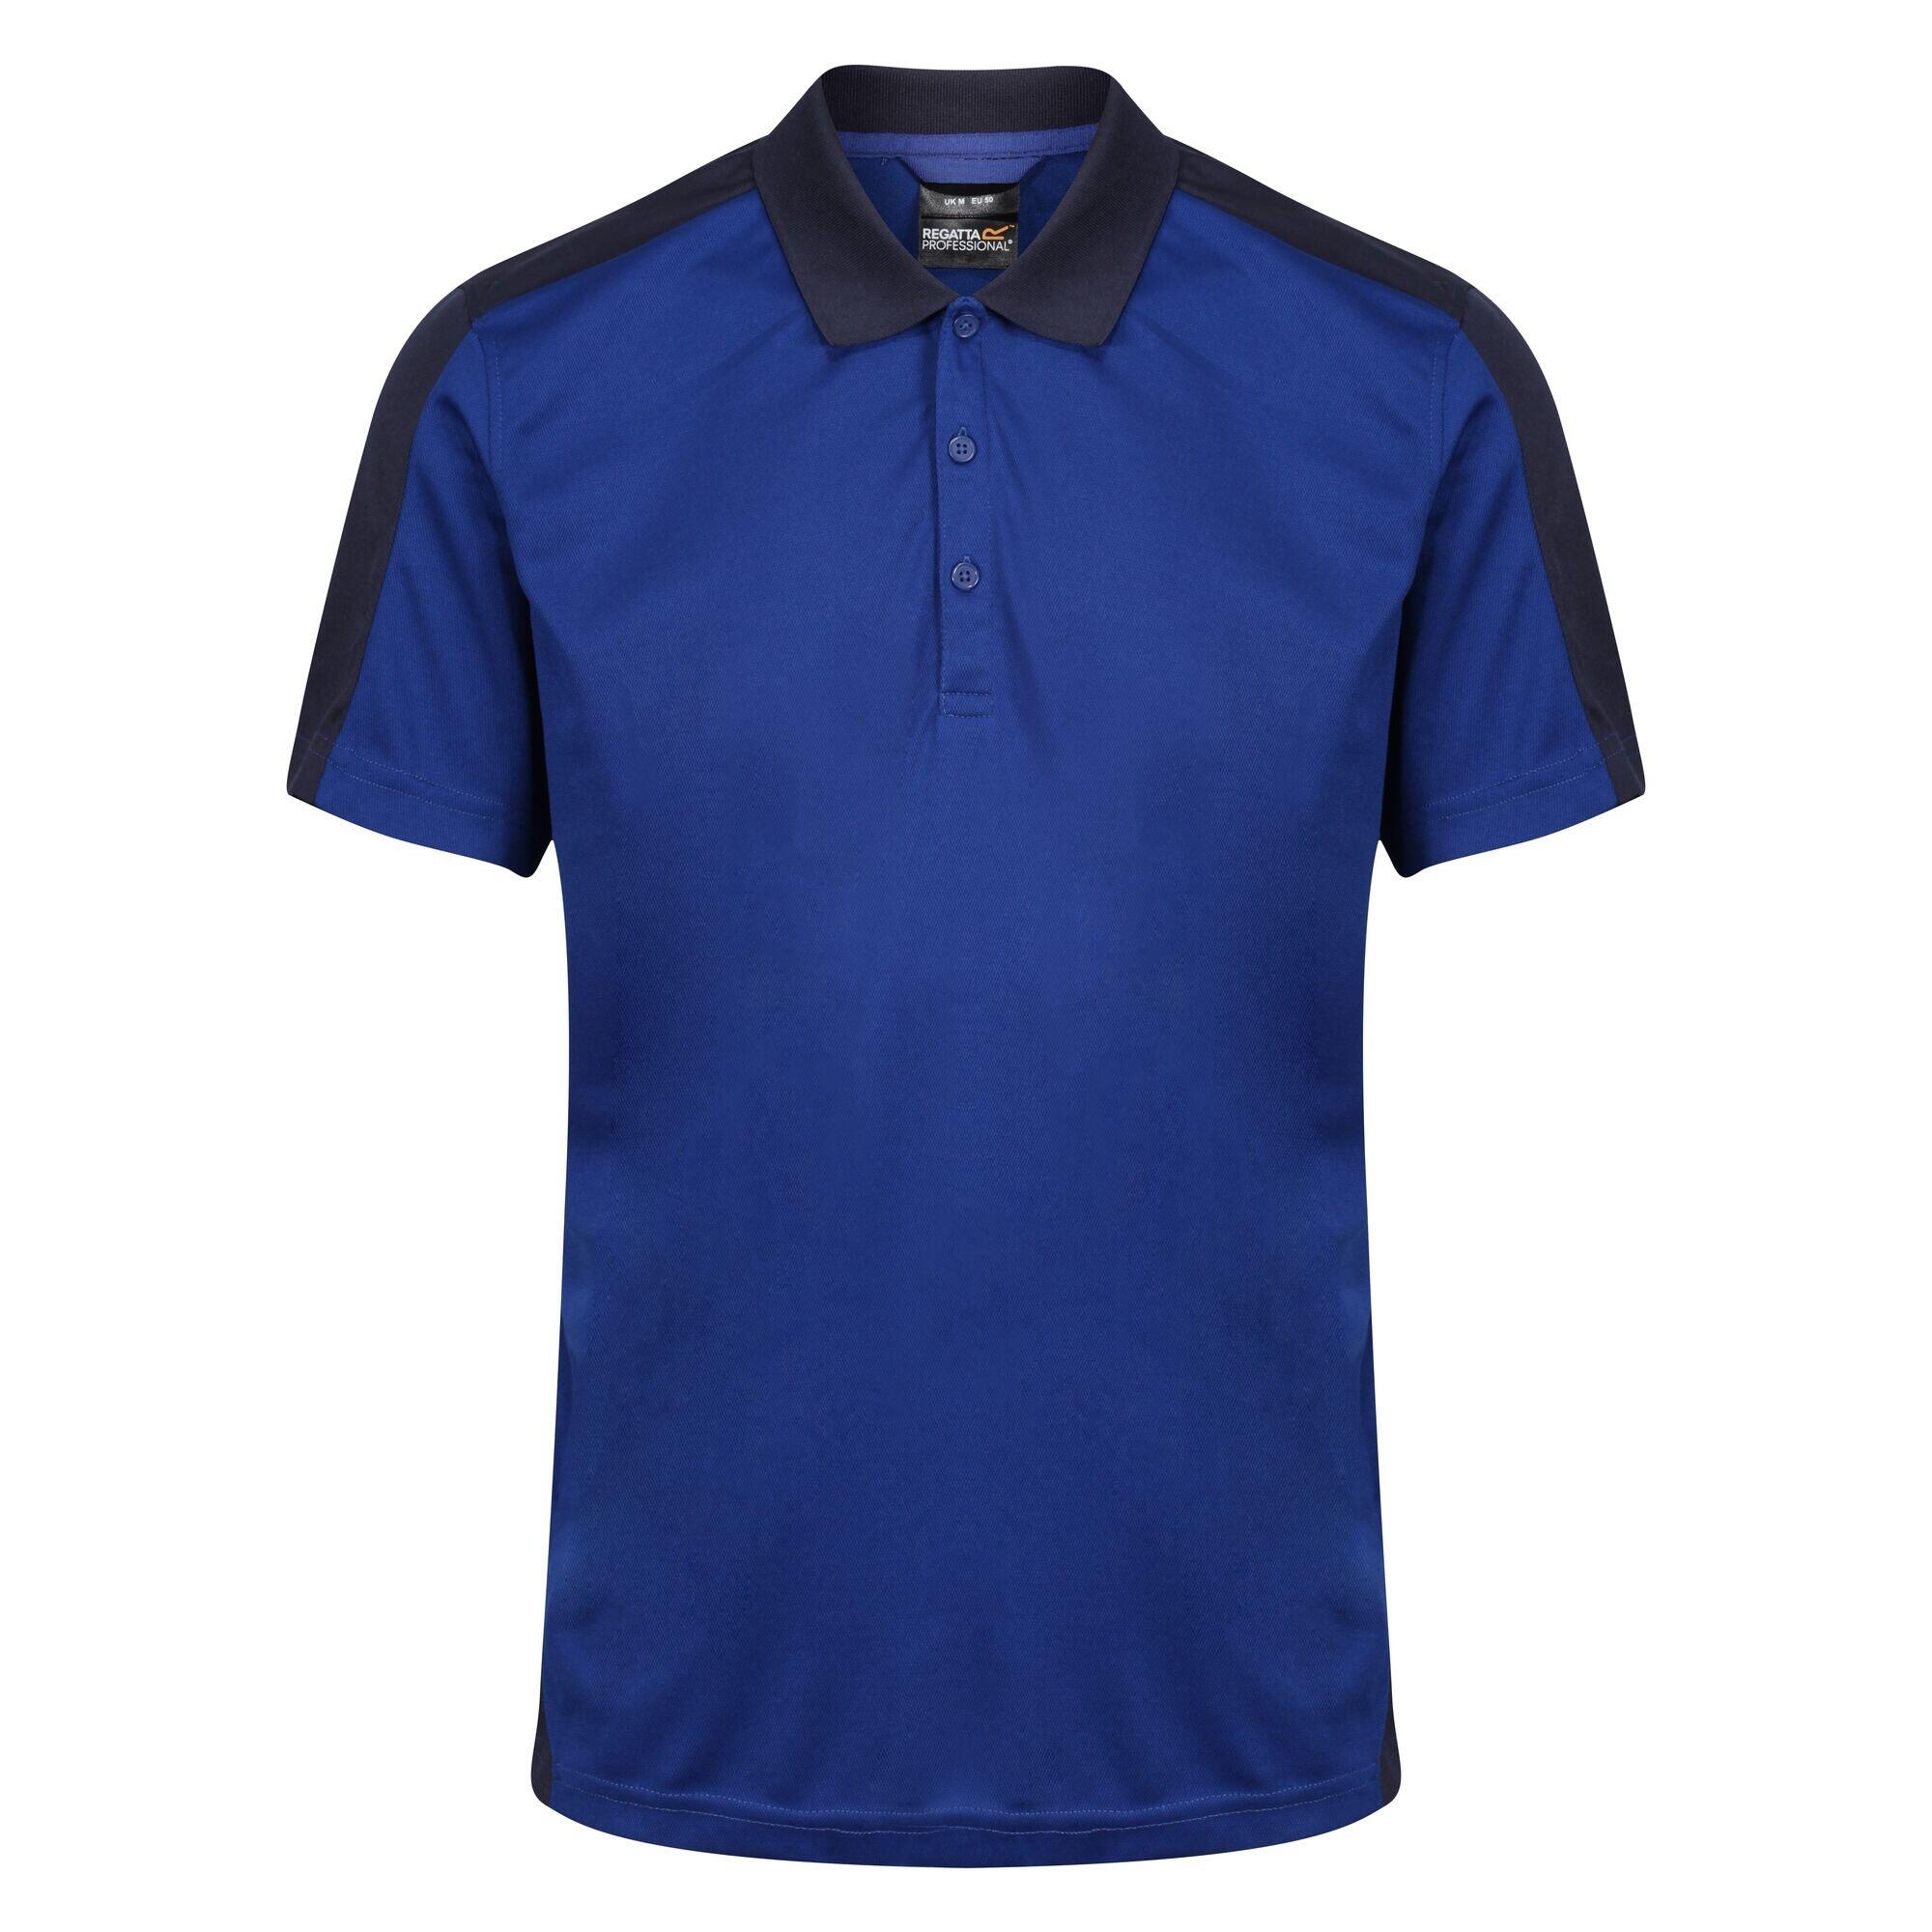 Contrast Coolweave Pique Polo Shirt (New Royal/Navy) 1/3